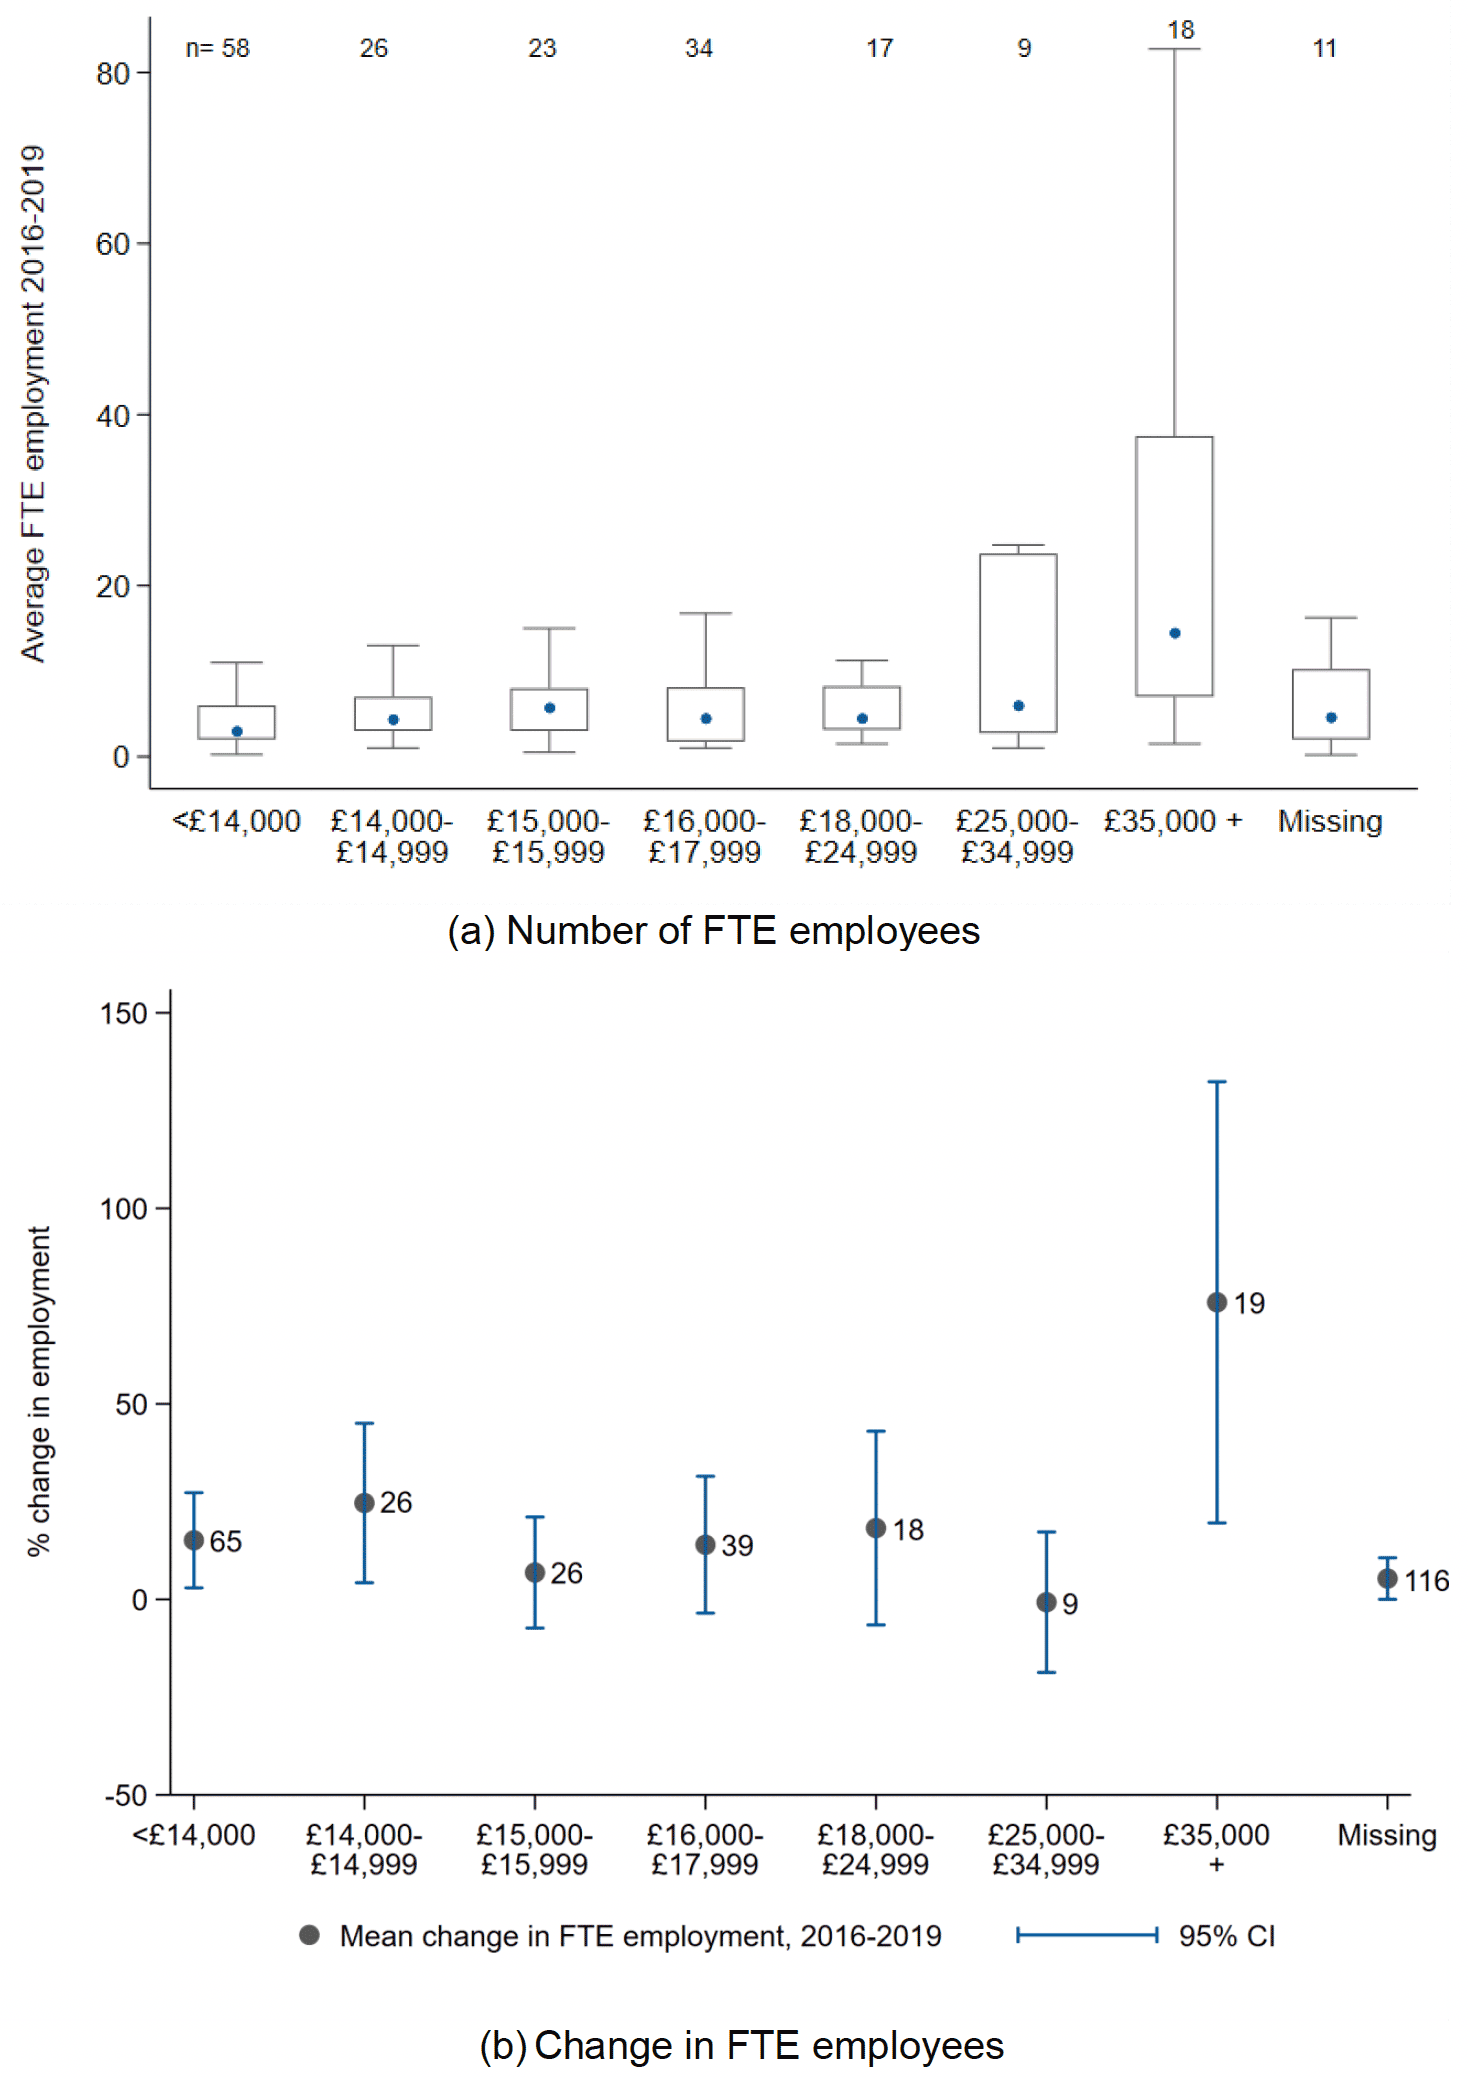 Two box and whisker plots show the mean and distribution of employment and percentage change in employment for each rateable value band in the survey. 